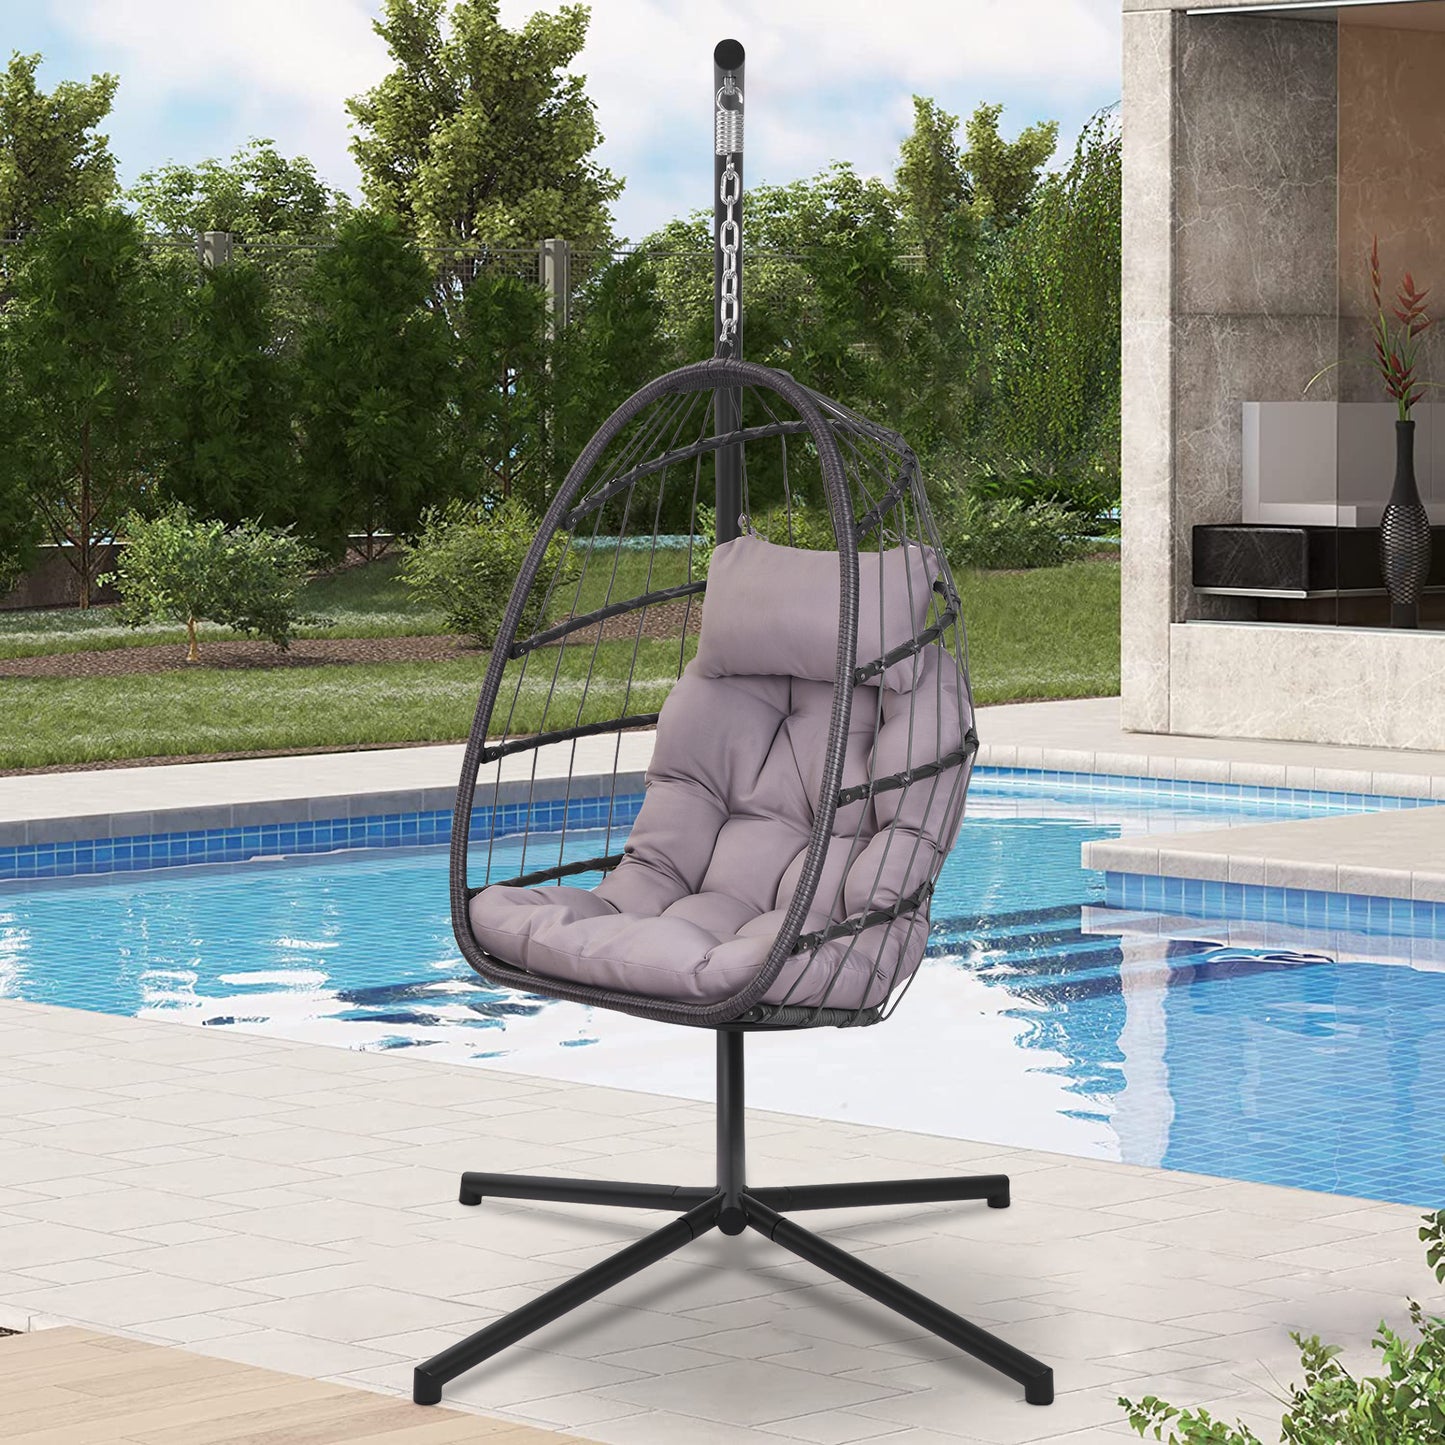 SYNGAR Hanging Egg Chair with Stand for Indoor/Outdoor, Patio Wicker Swing Chair with Seat Cushion & Pillow, Heavy Duty Hammock Basket Chair for Bedroom, Porch, Balcony, 300 lbs Capacity, Y025